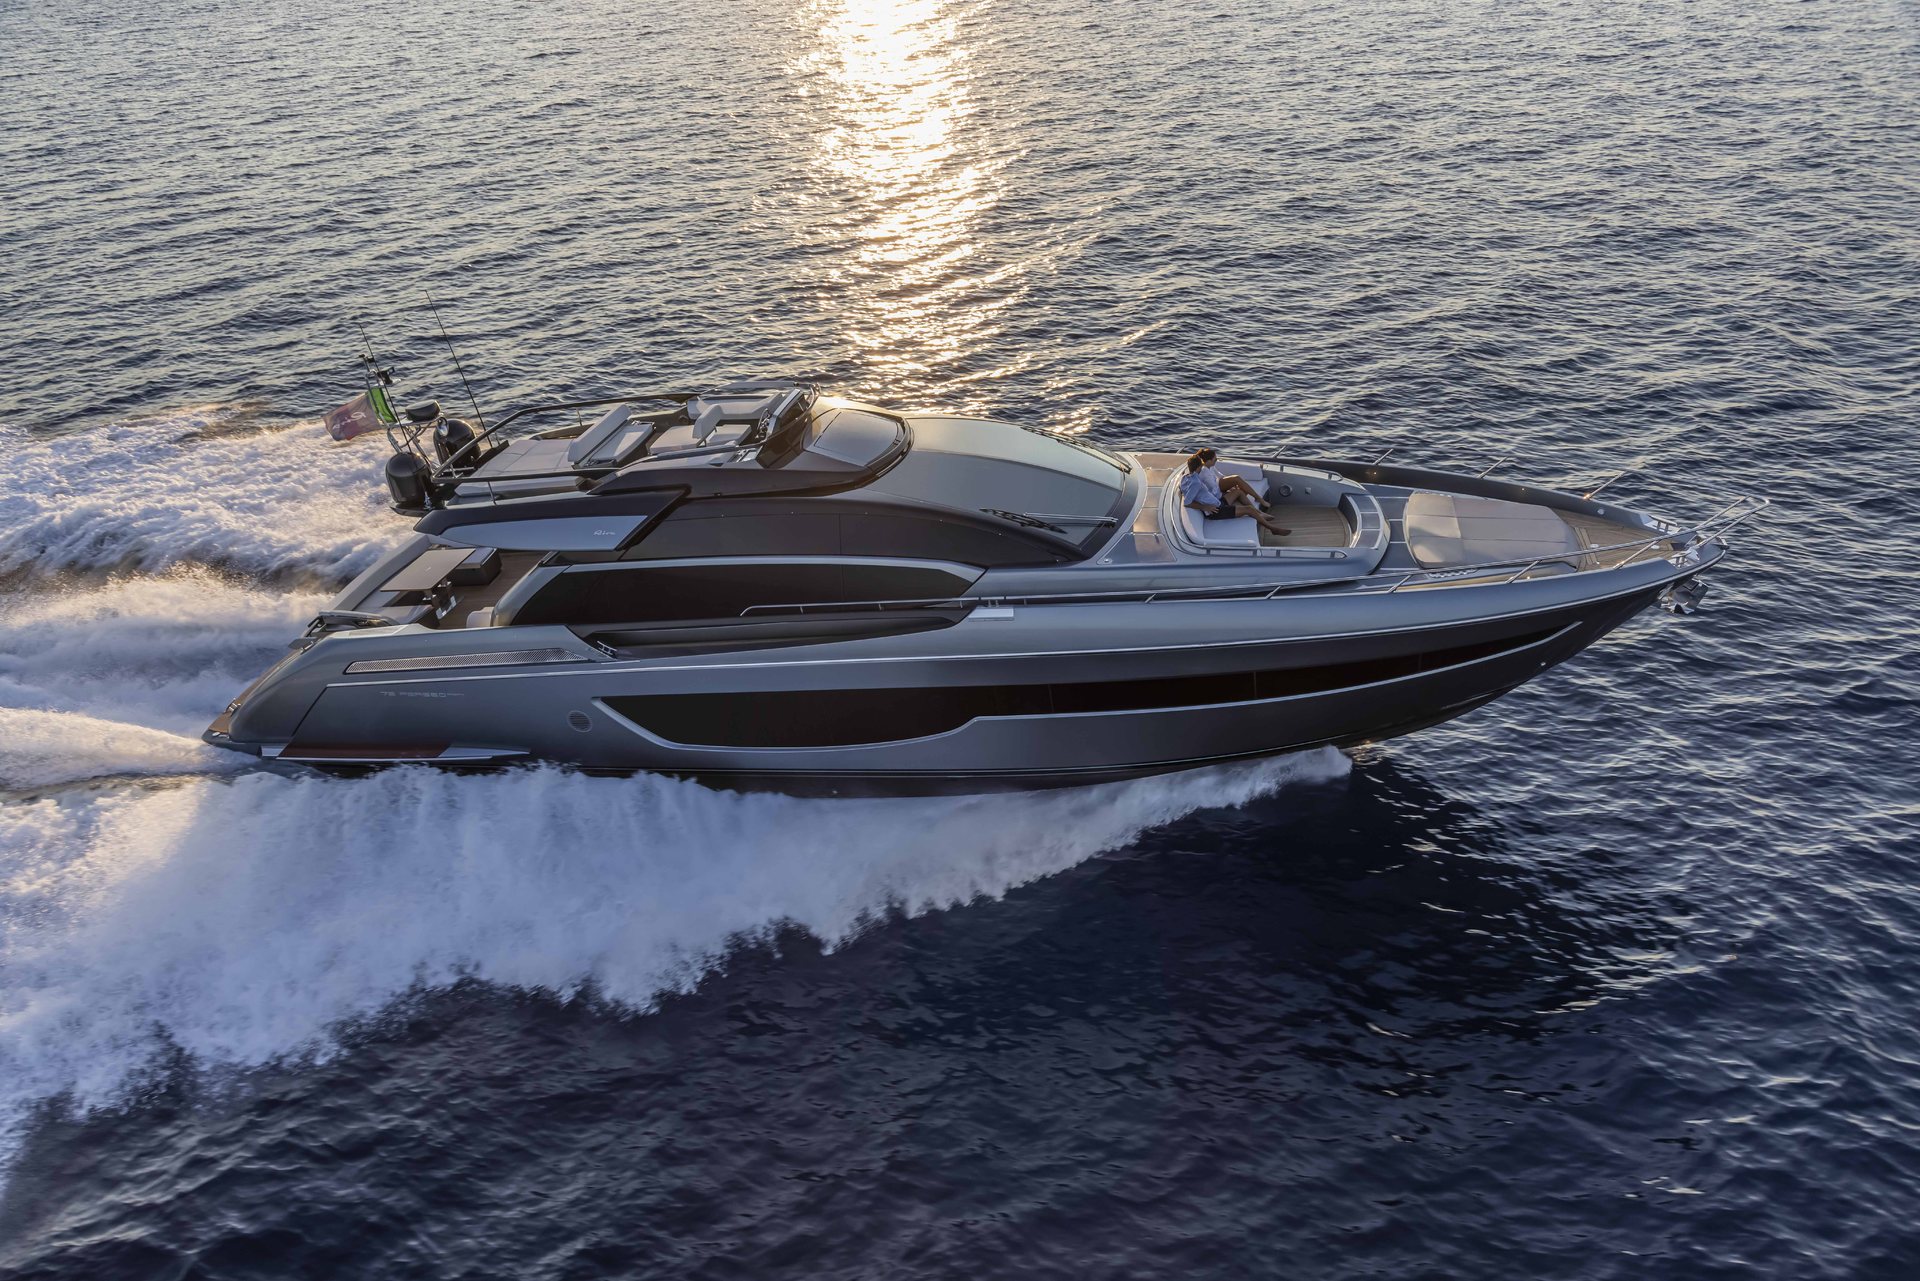 360 VR Virtual Tours of the Riva 76 Perseo Super